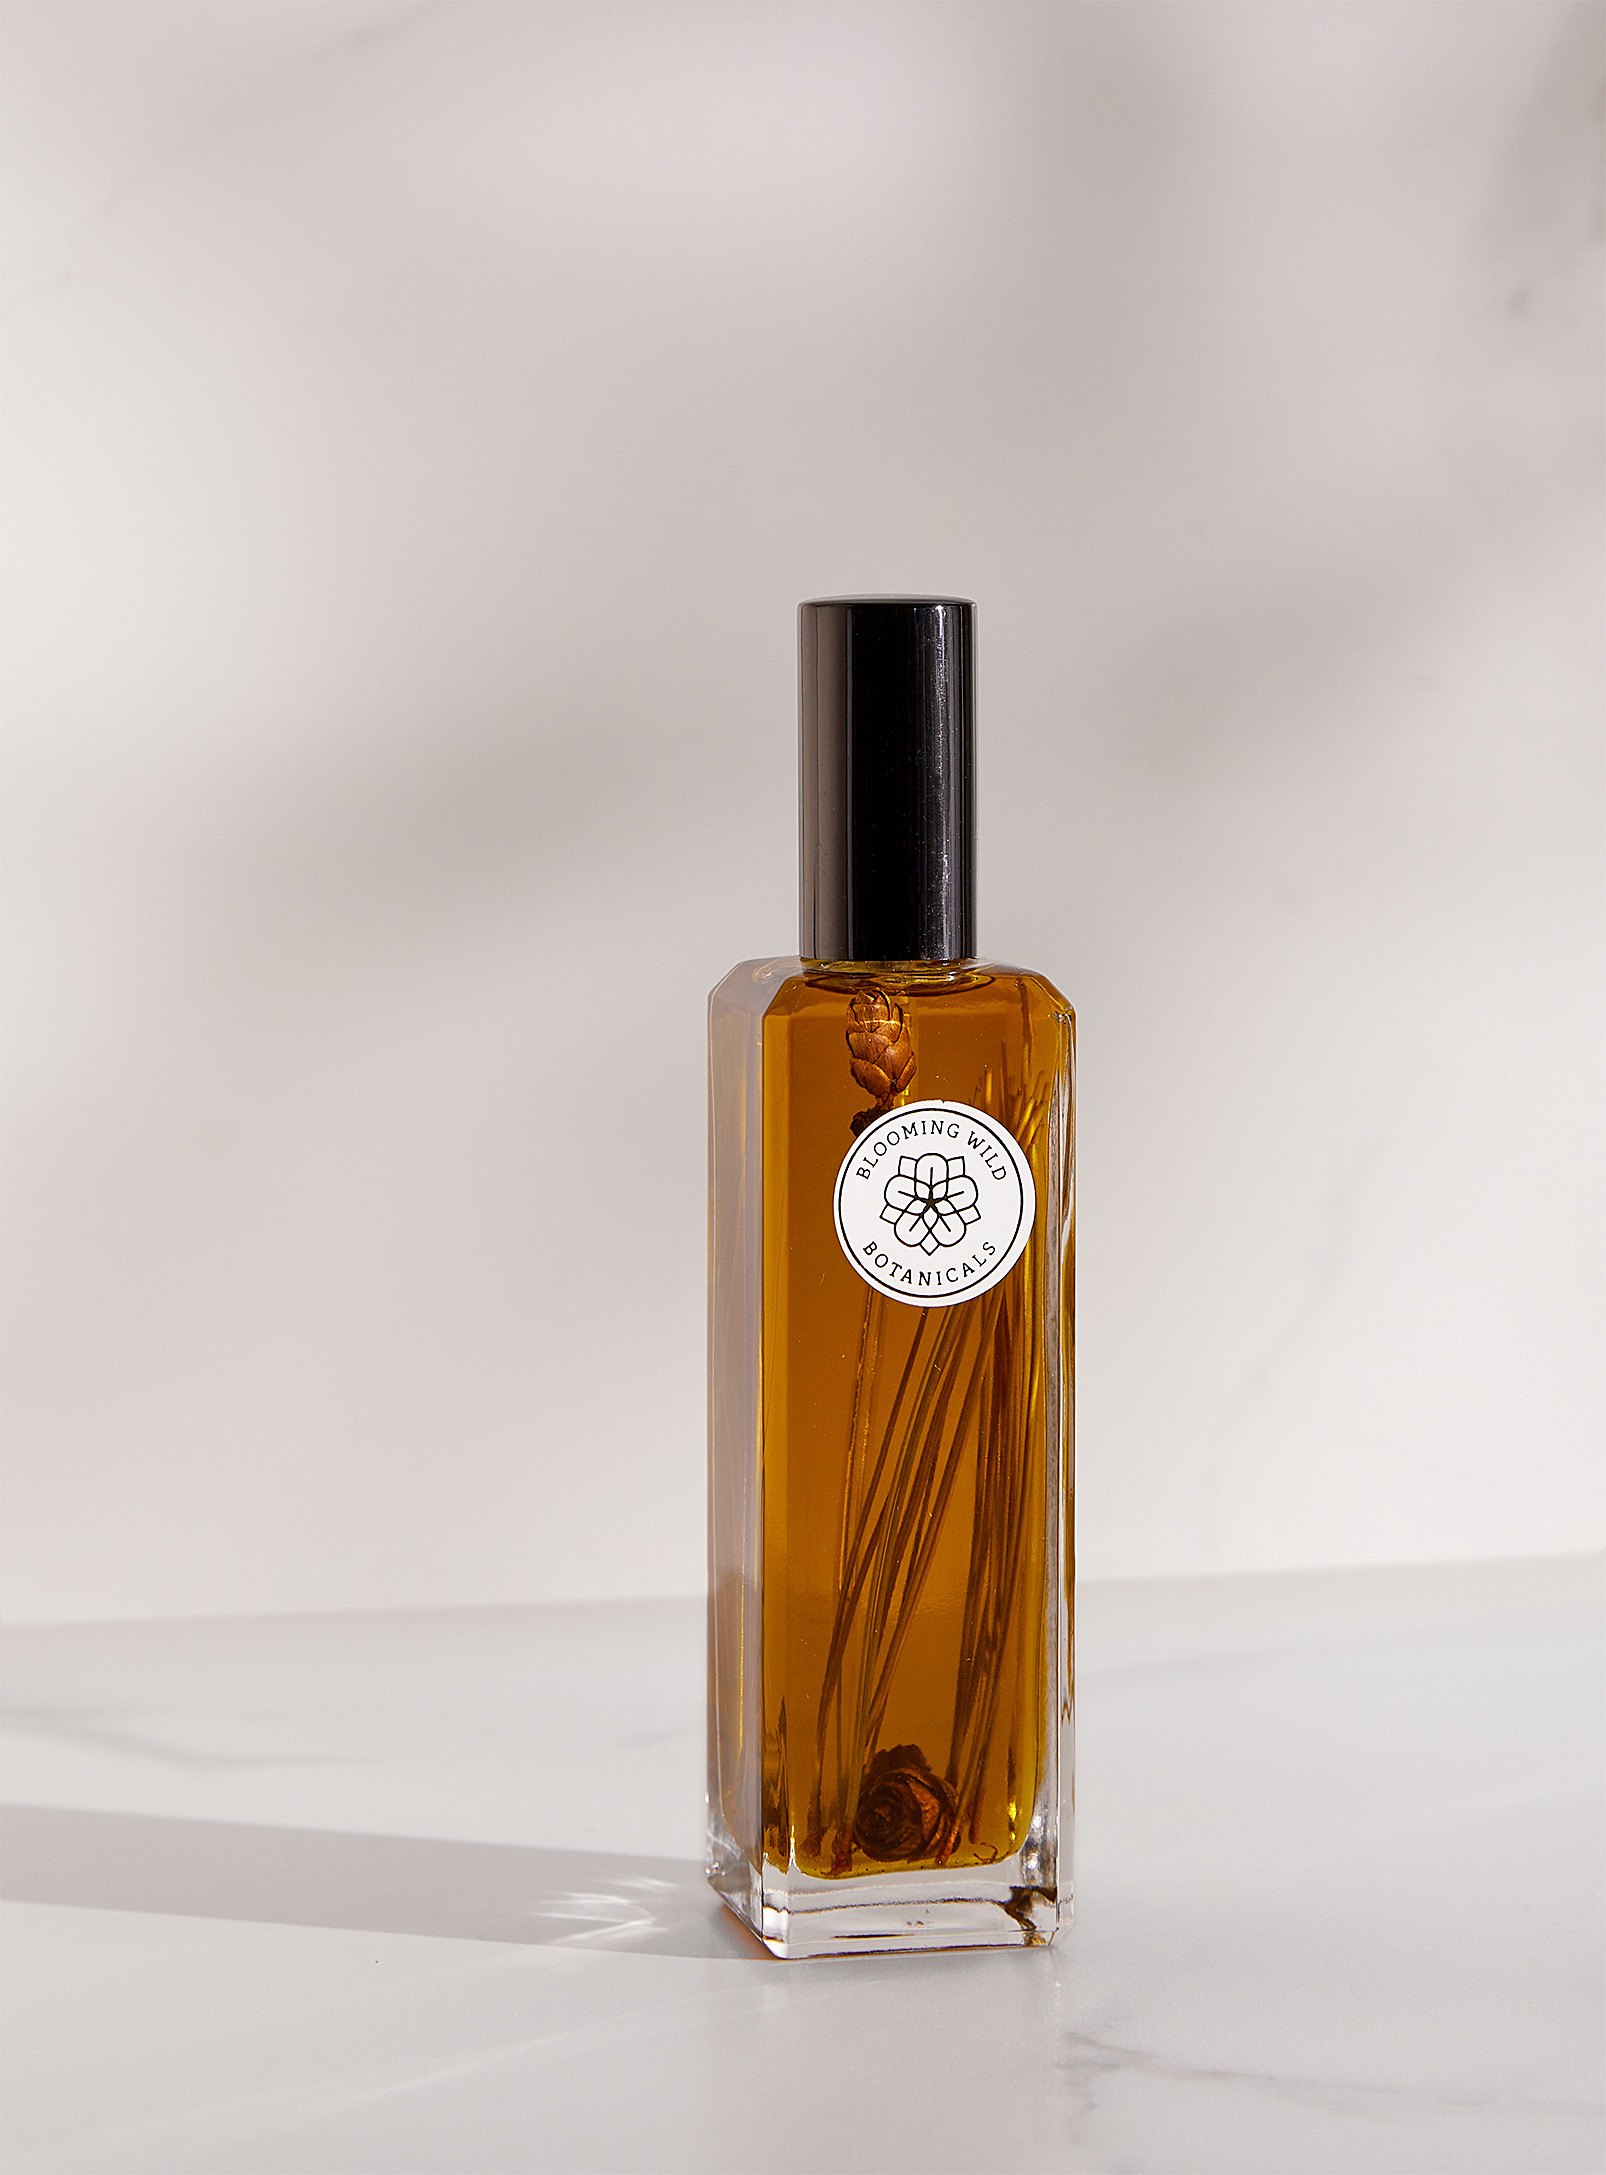 Blooming Wild Botanicals - Heartwood body oil